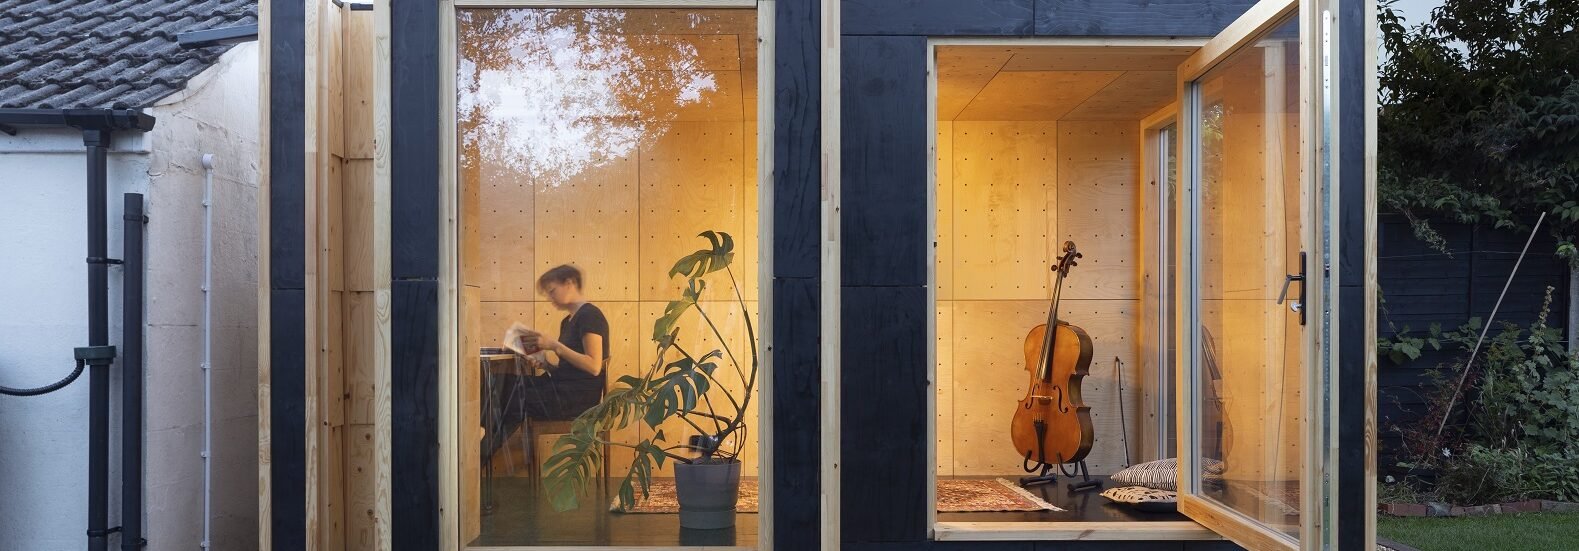 Robots built this timber rehearsal studio for musicians